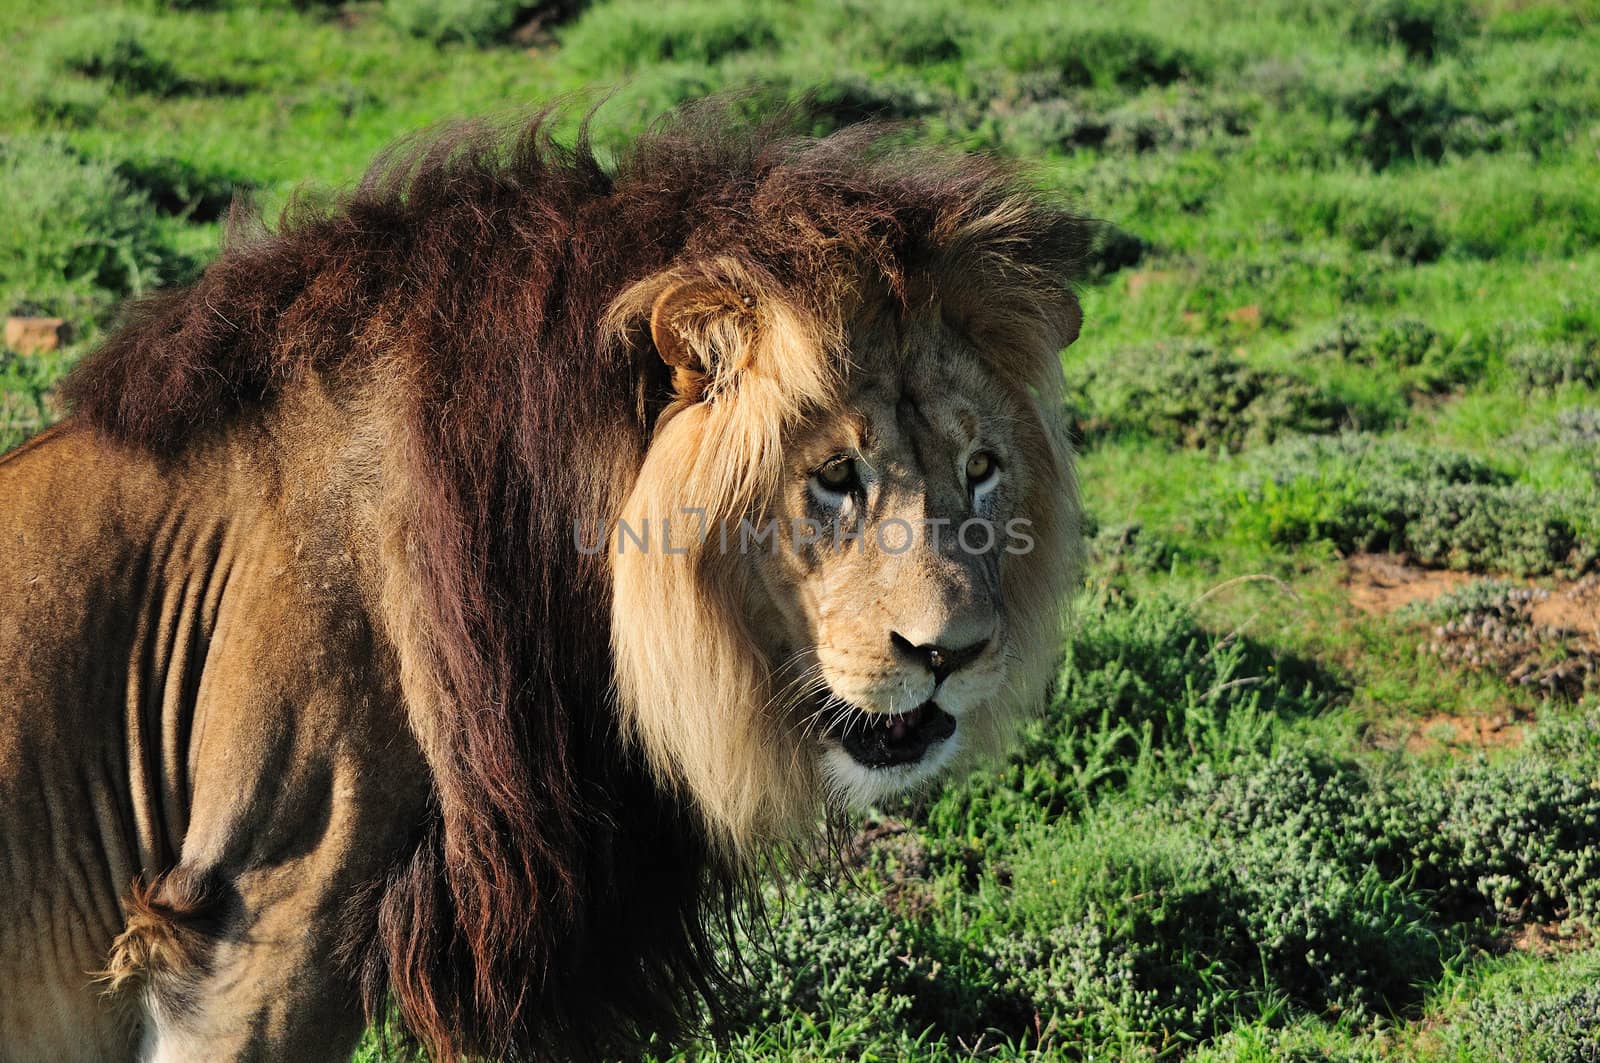 A Kalahari lion, panthera leo, in the Kuzuko contractual area of the Addo Elephant National Park in South Africa